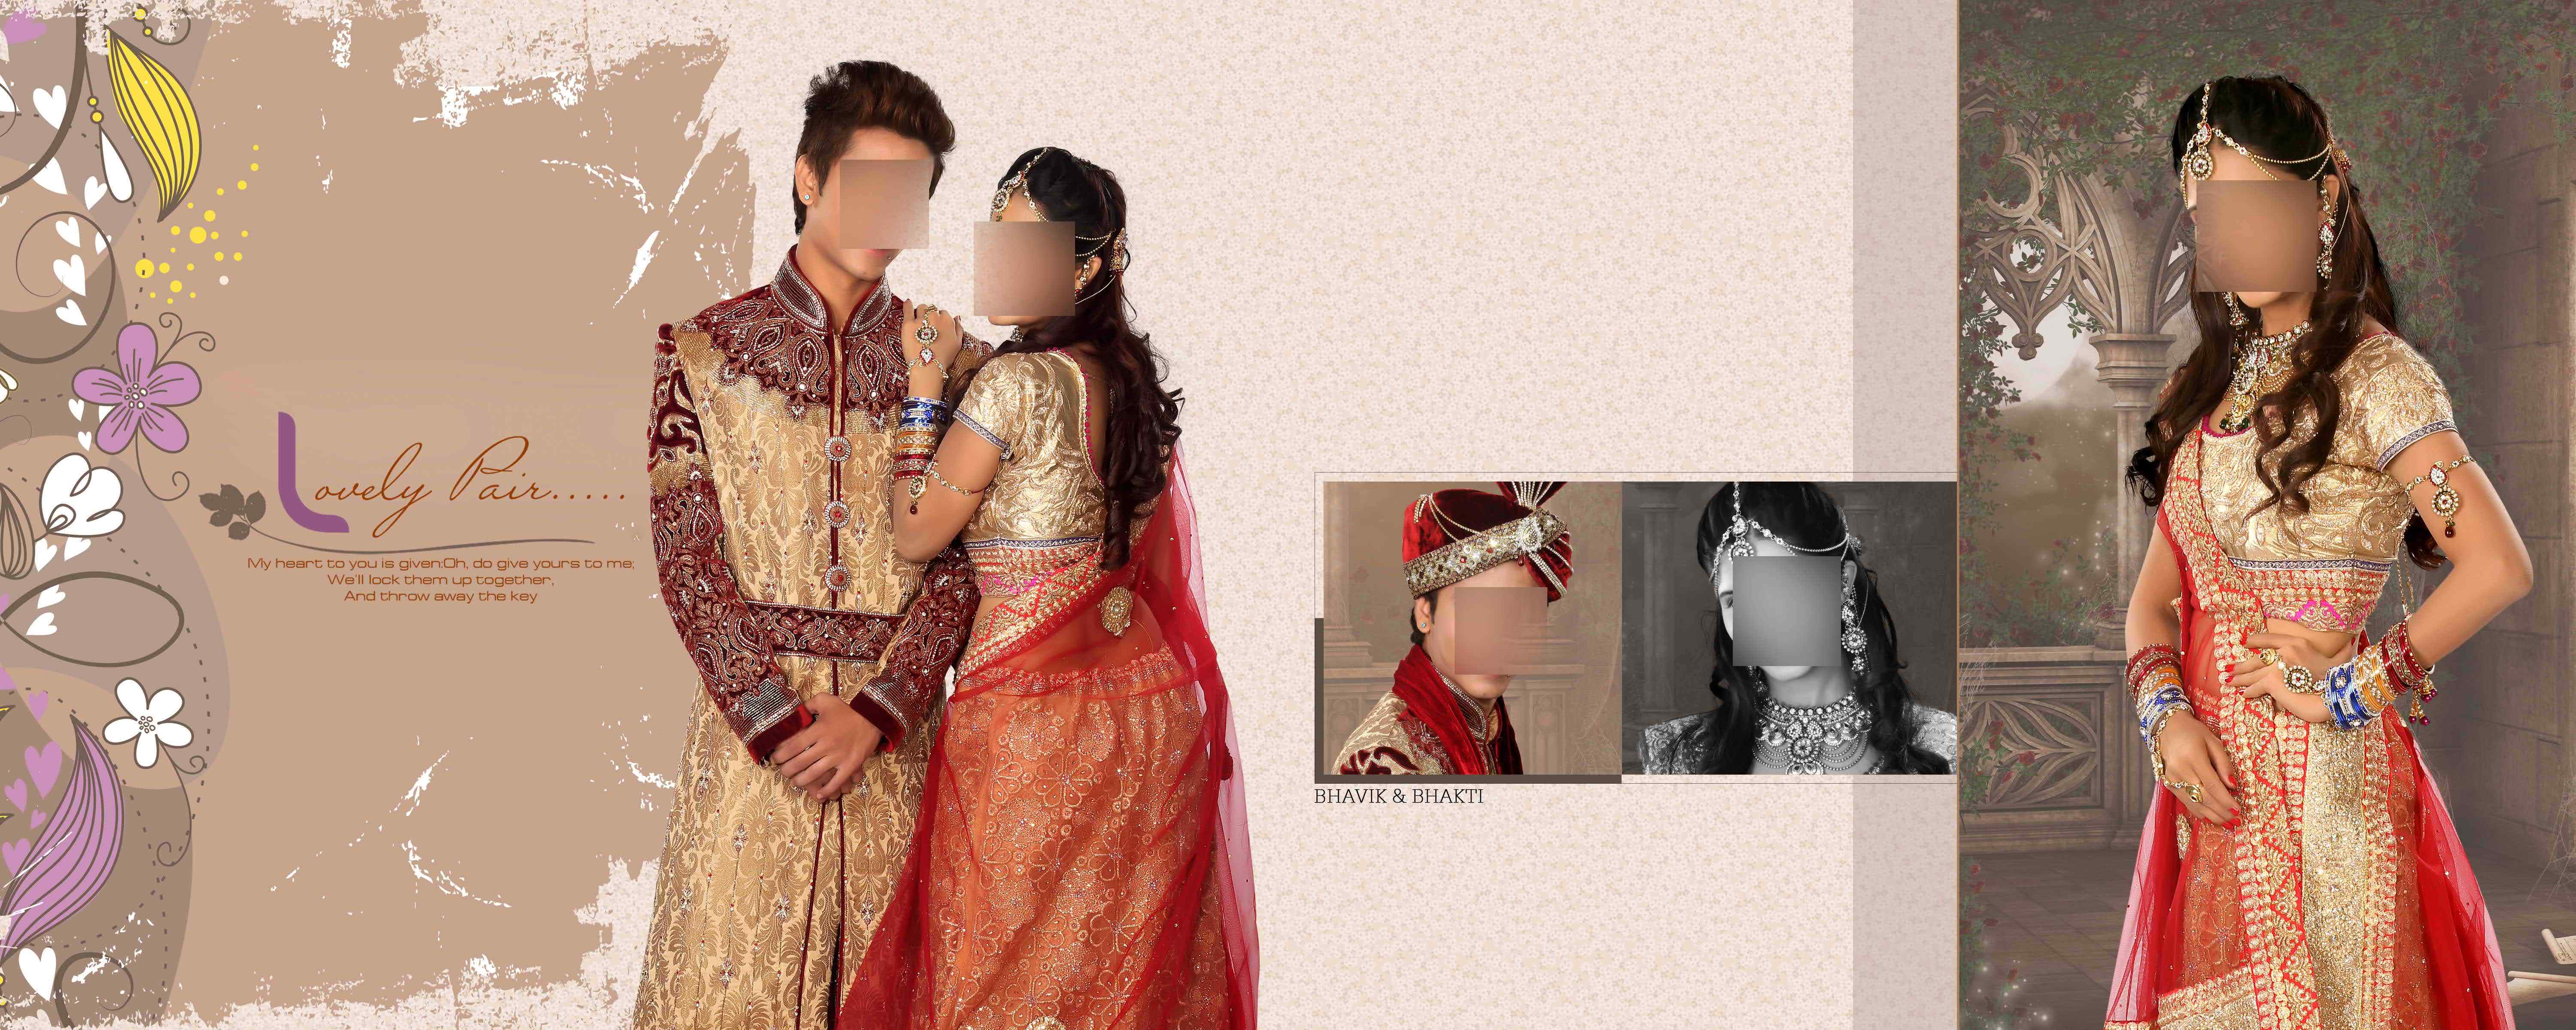 Indian Wedding And Engagement Photo Album Sheets Vol 3 Psd 